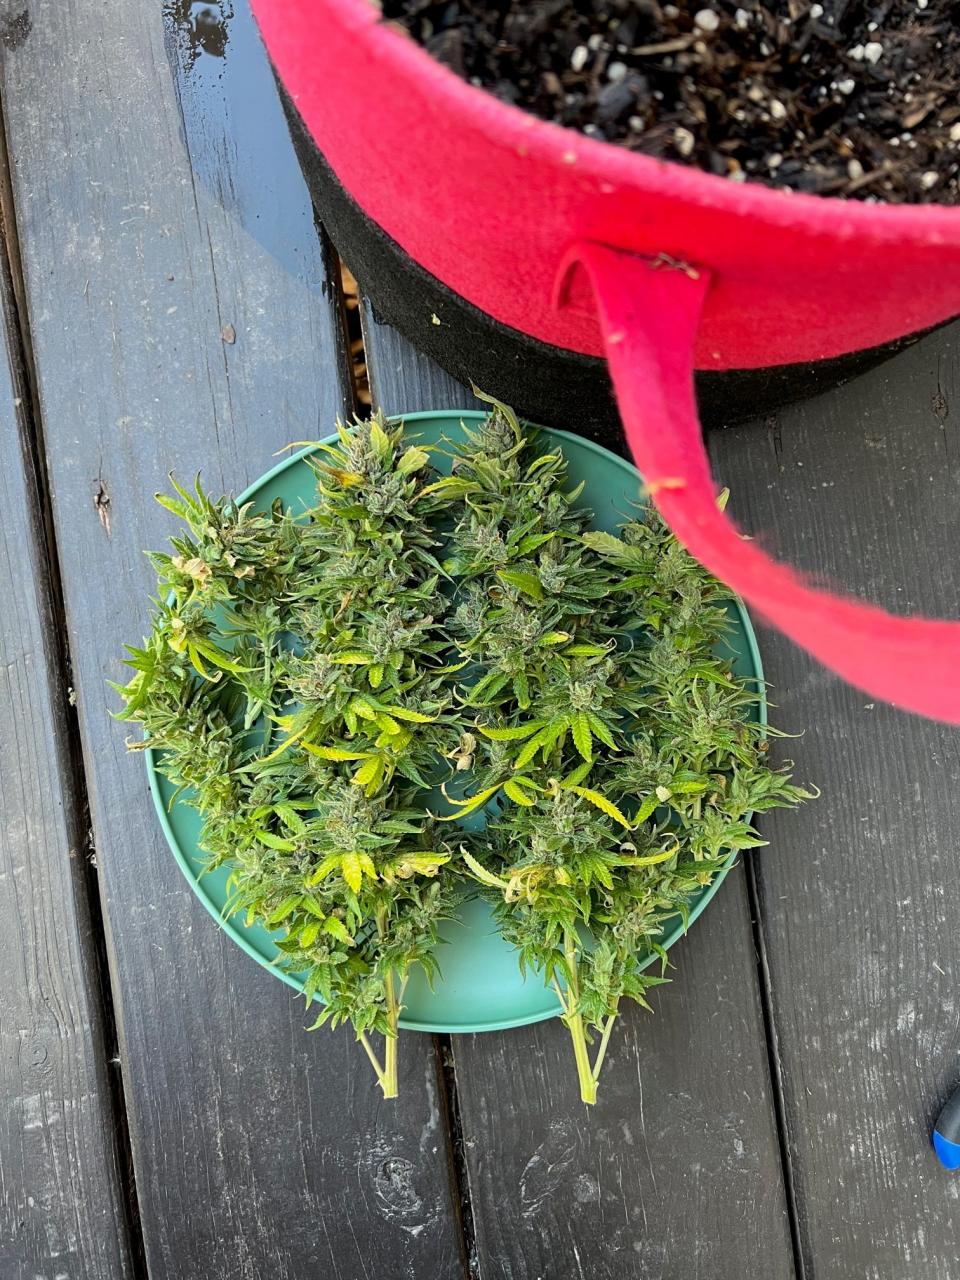 Marijuana plant clippings sit on a plate on Cecil Cornish's porch in Joplin. Cornish planted his first marijuana plants in February 2022 and harvested about four ounces in October 2022.